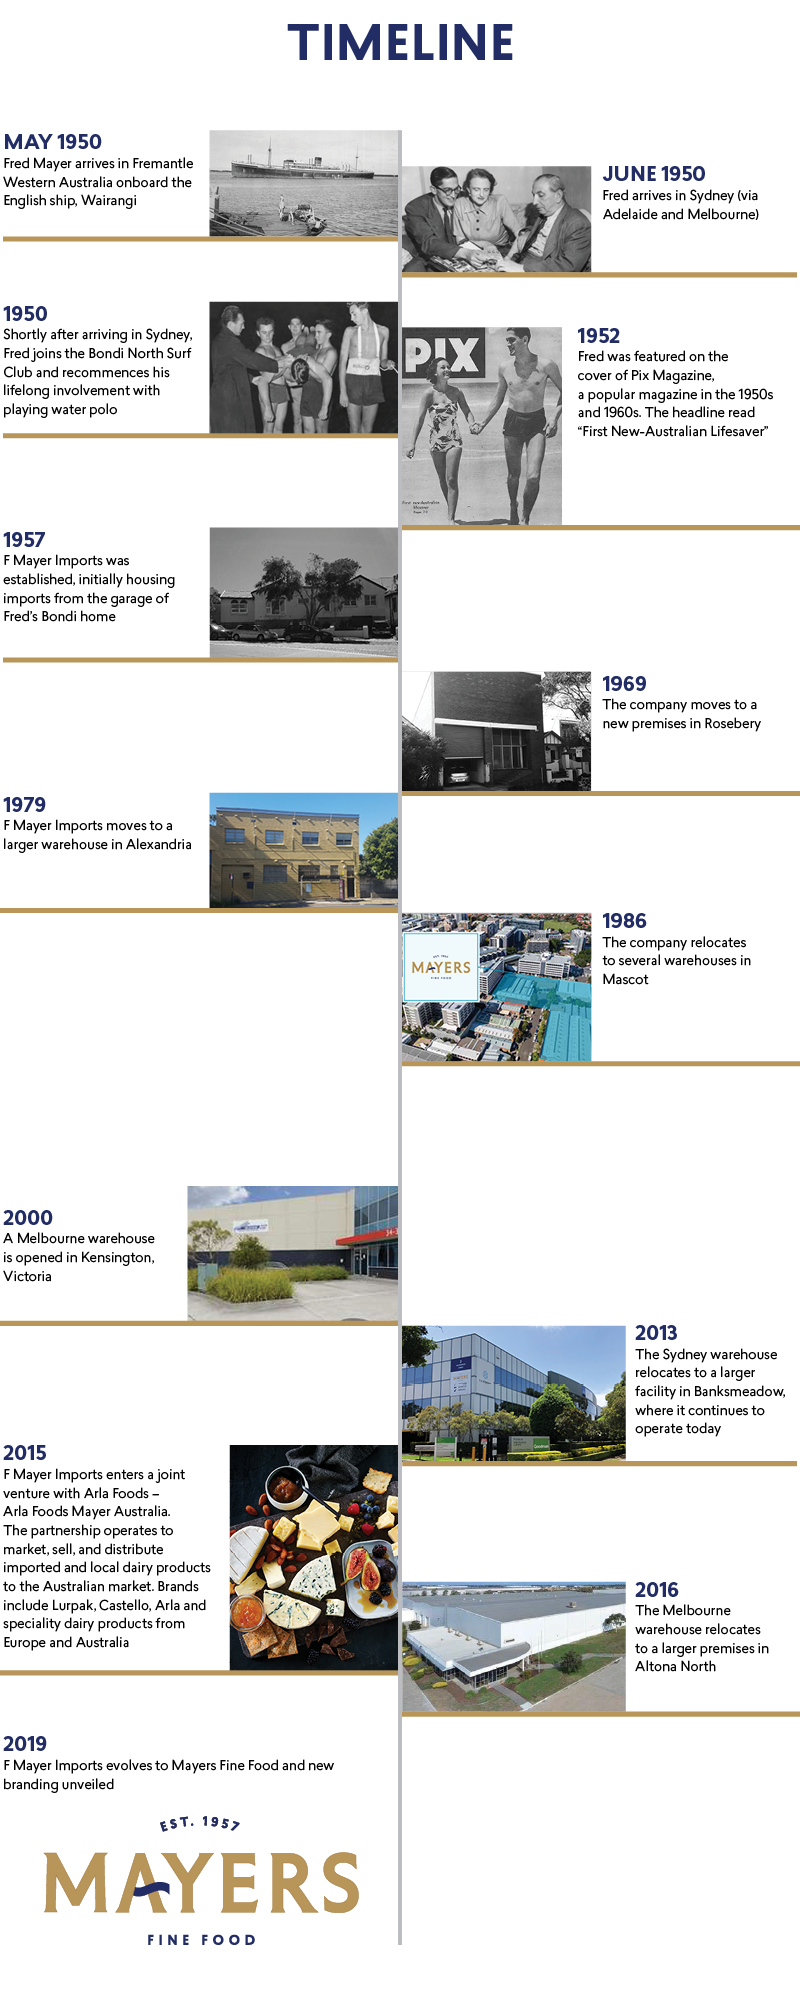 Mayers Timeline Graphic showing company milestones throughout the years